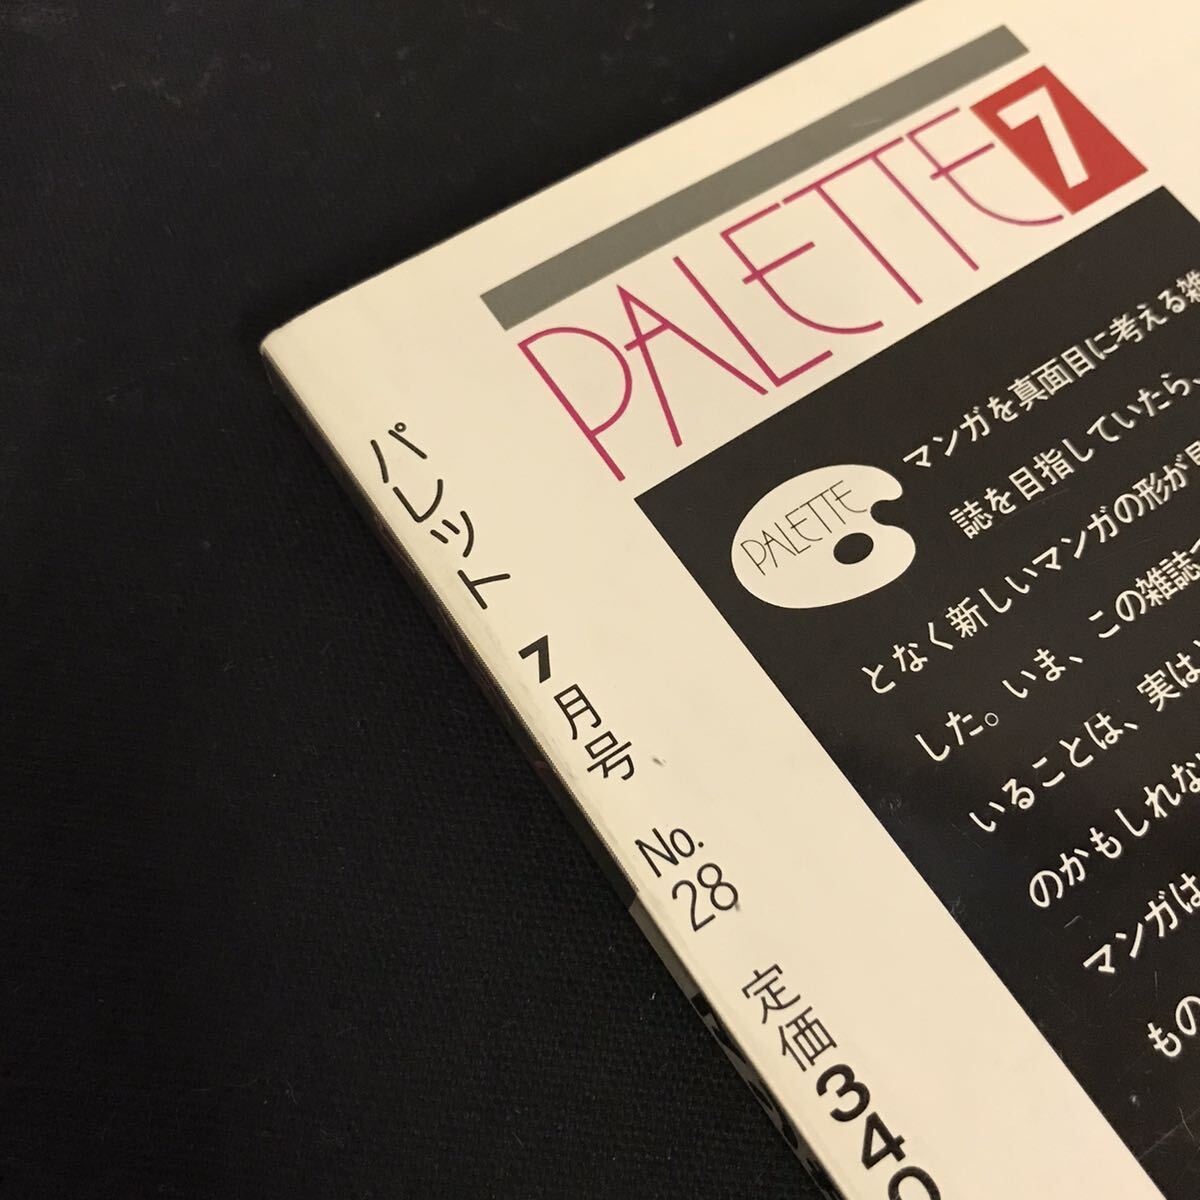 E1853 is # PALETTE Palette 7 month number Showa era 61 year 7 month 1 day issue No.28